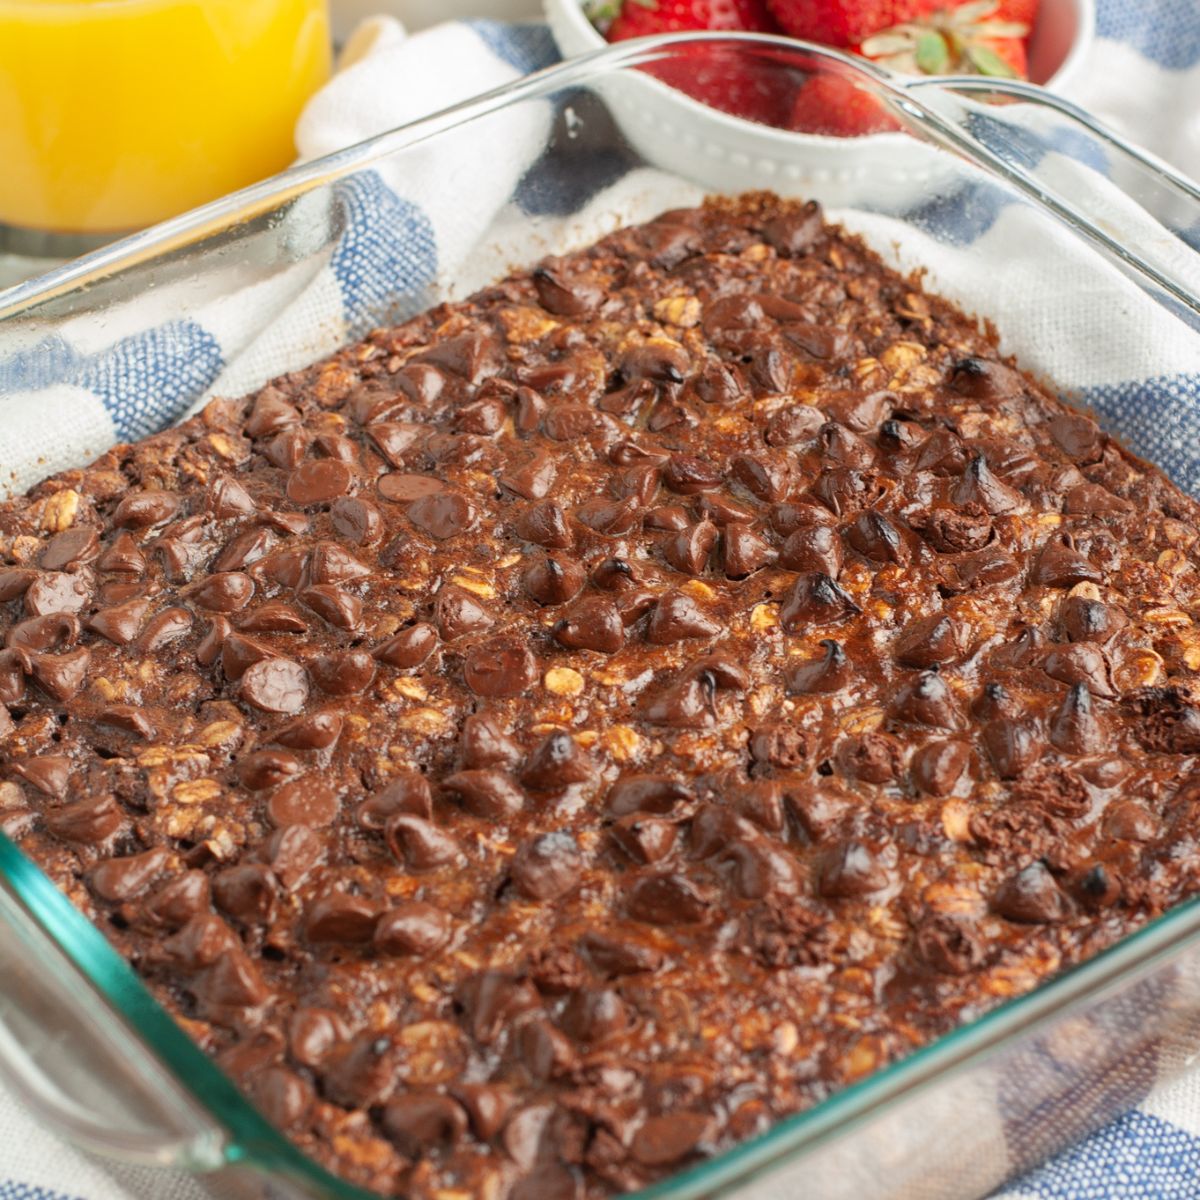 Baking dish with chocolate baked oats. 